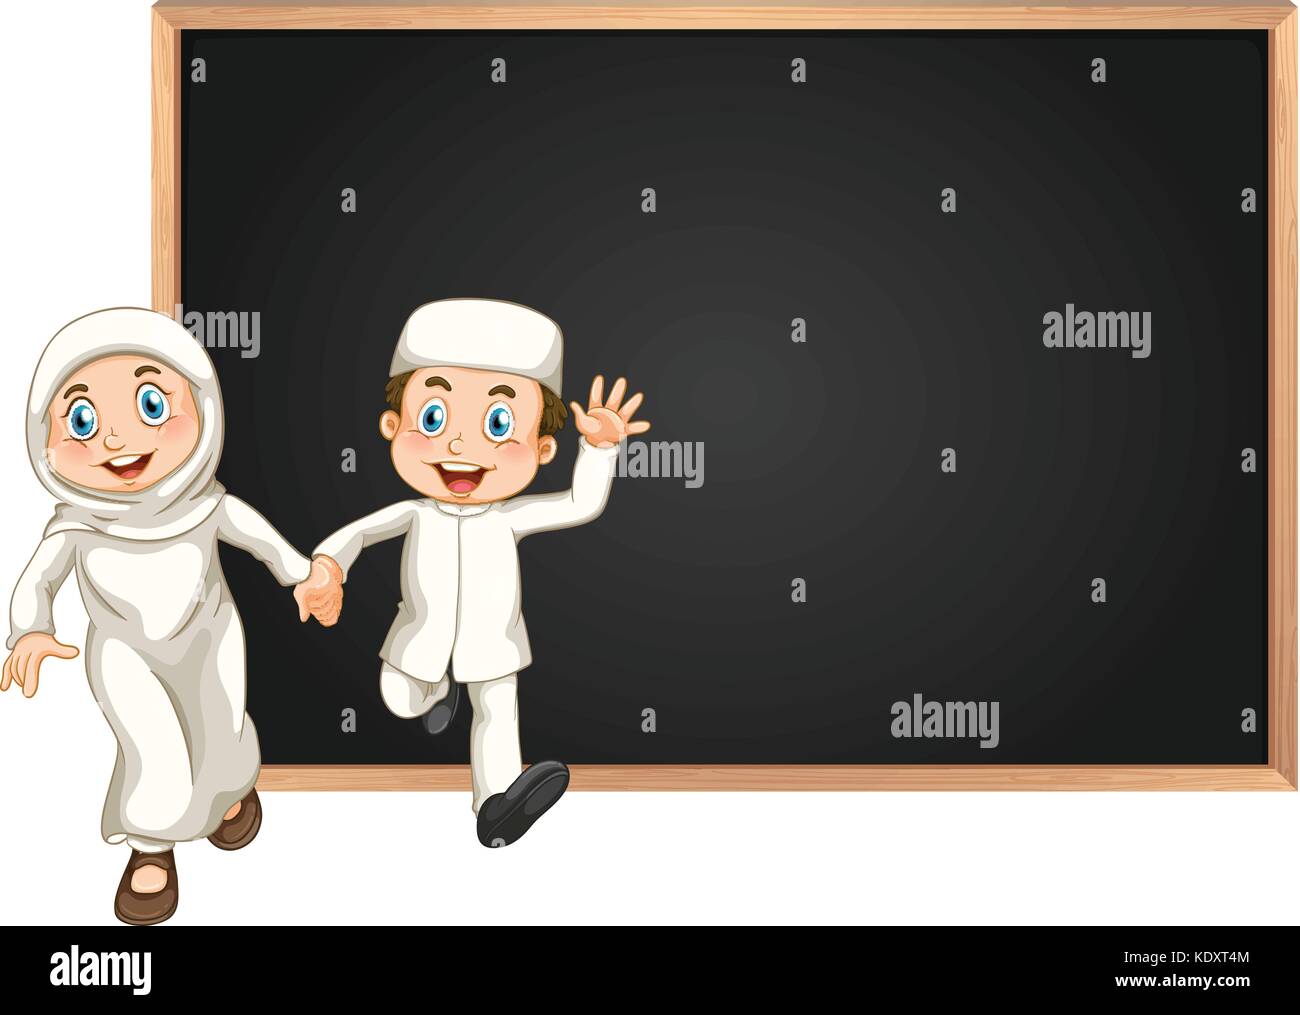 Muslim Couple Stock Vector Images - Alamy